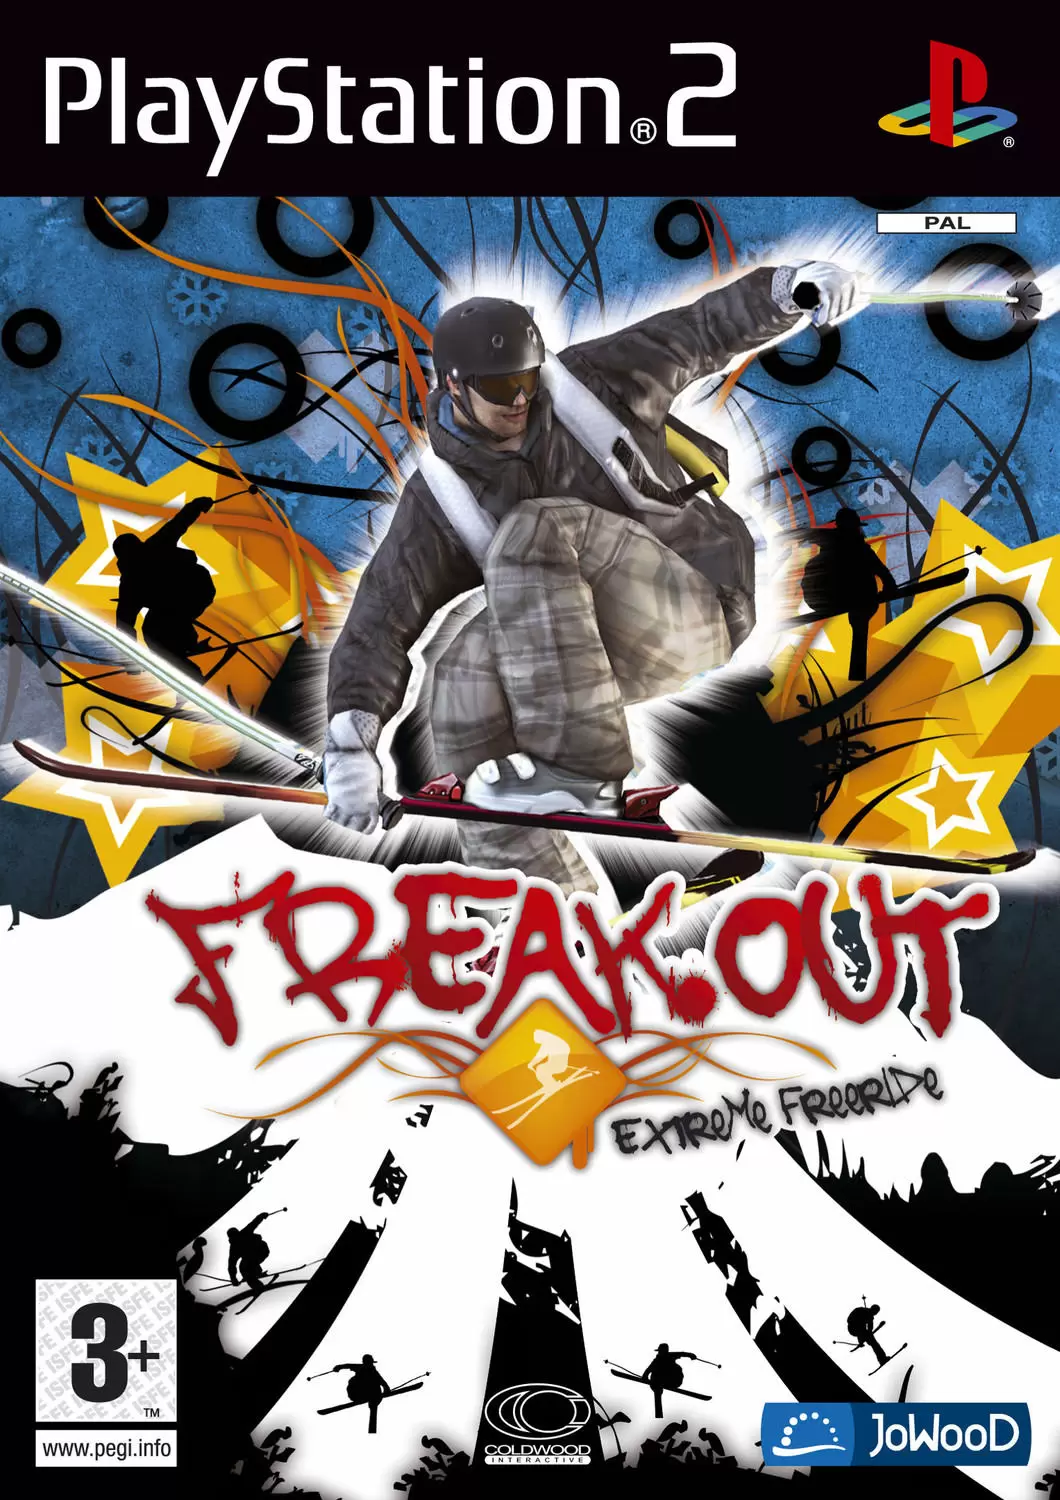 PS2 Games - Freak Out - Extreme Freeride